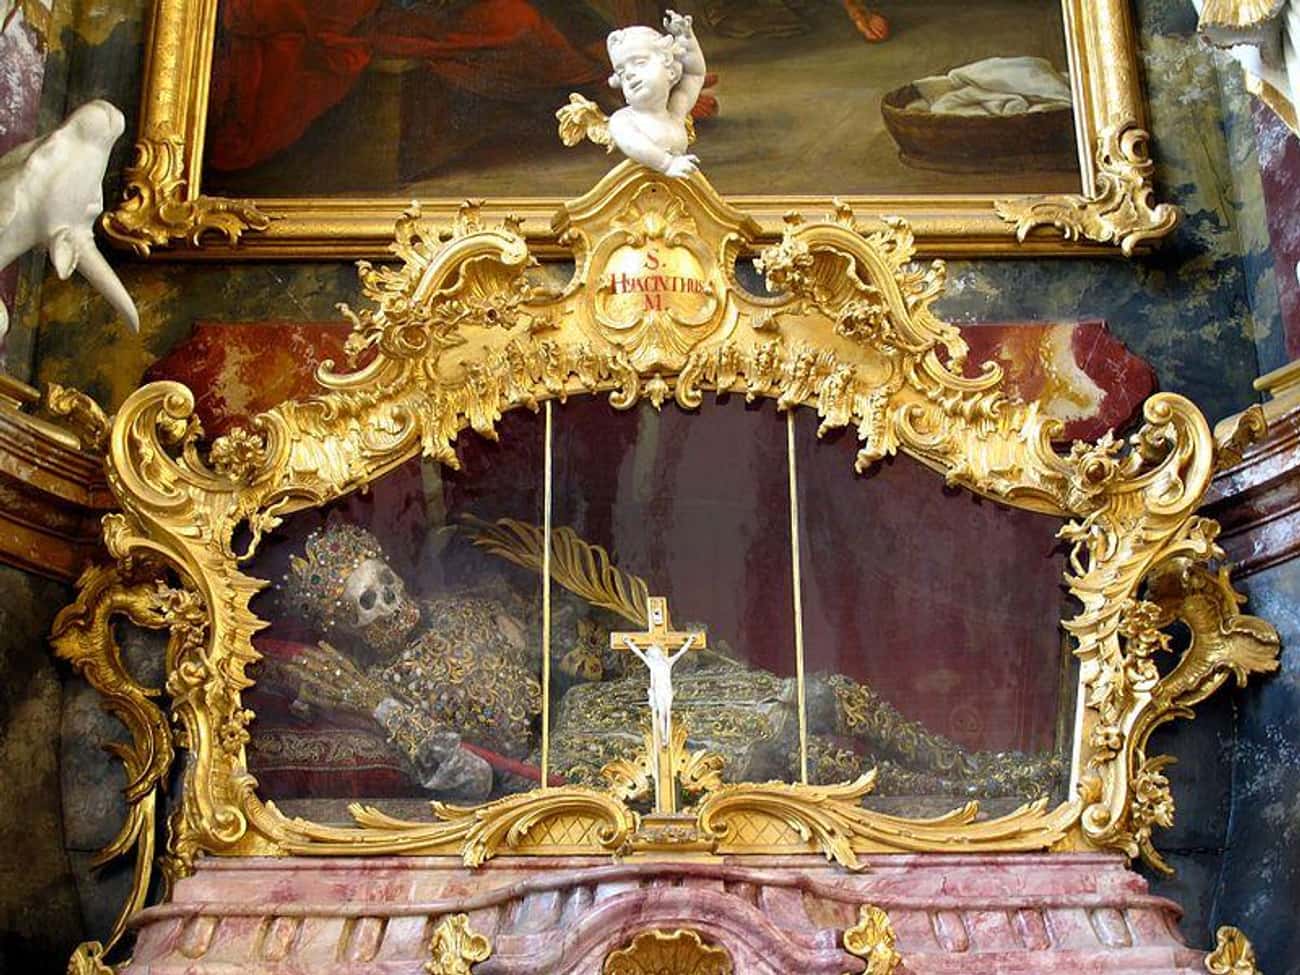 The Remains Of Saint Hyacinth Are On Display At The Church Of The Assumption In Bavaria, Germany